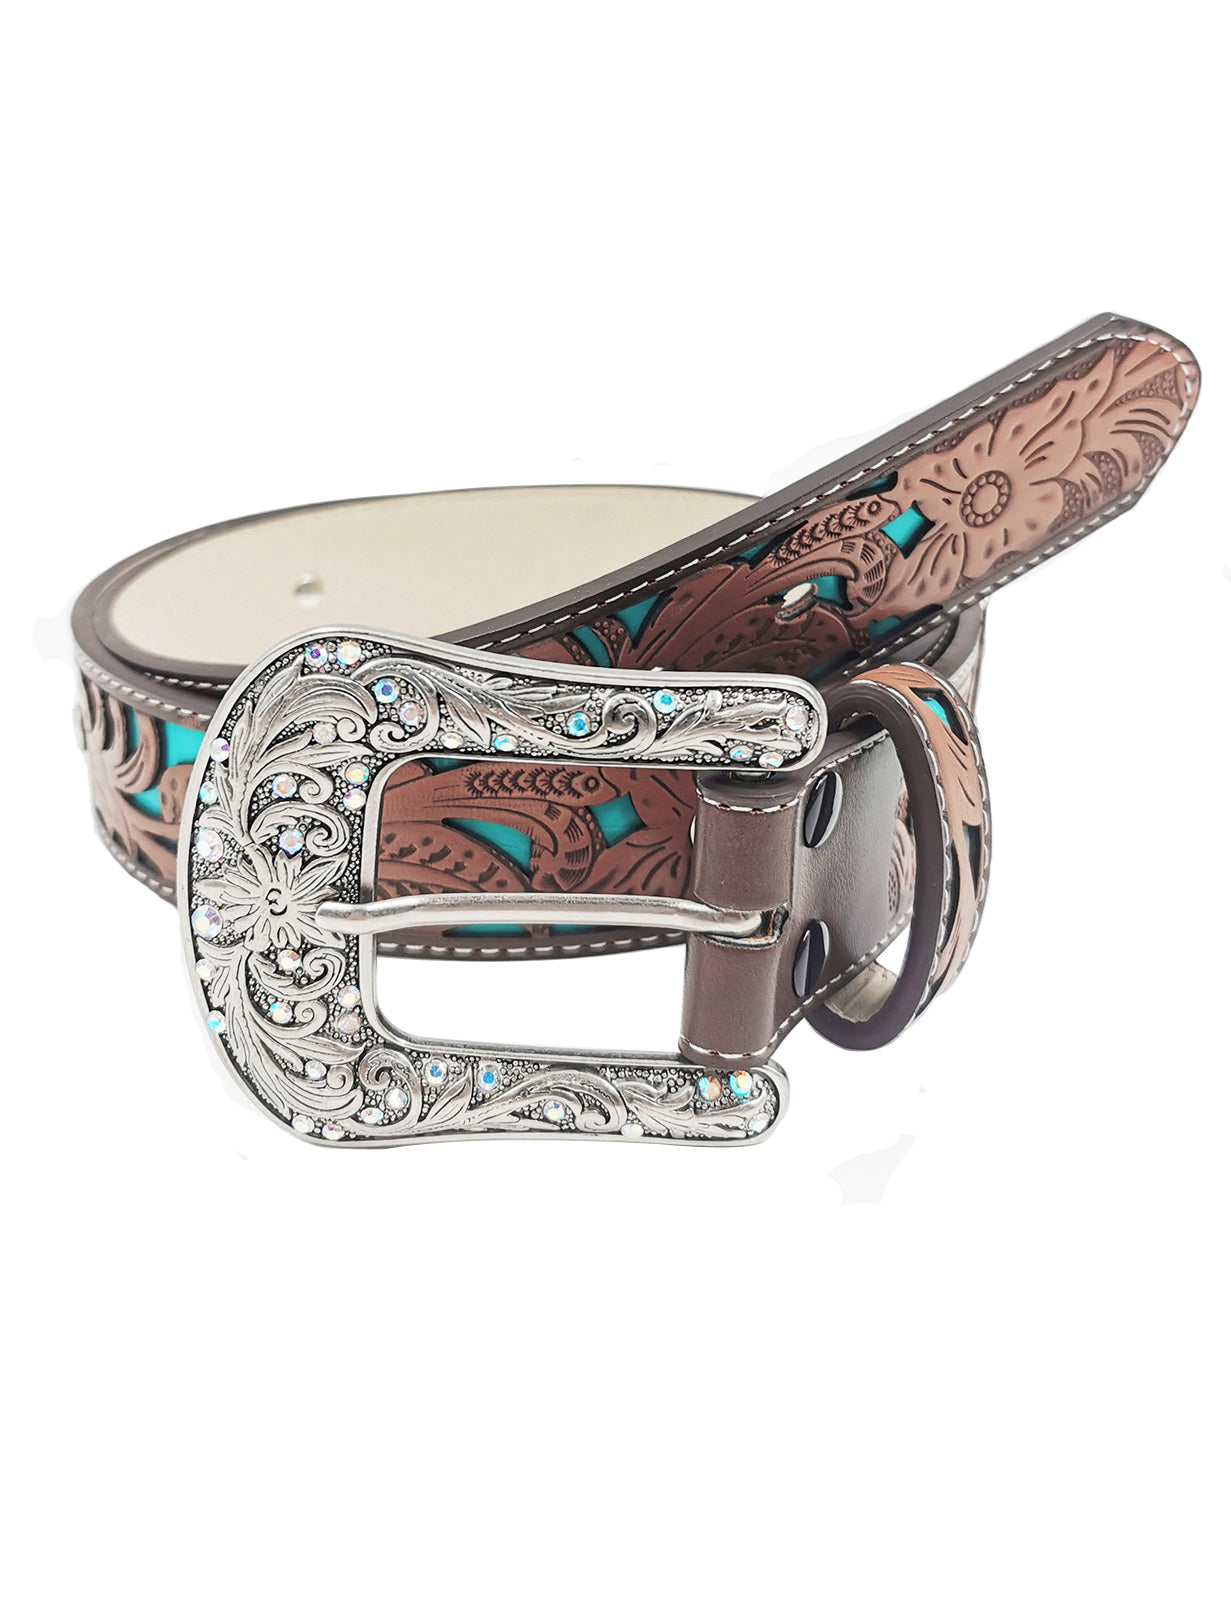 TOPACC Western Turquoise Belts - Turquoise Indians Belt Buckle Copper/Bronze